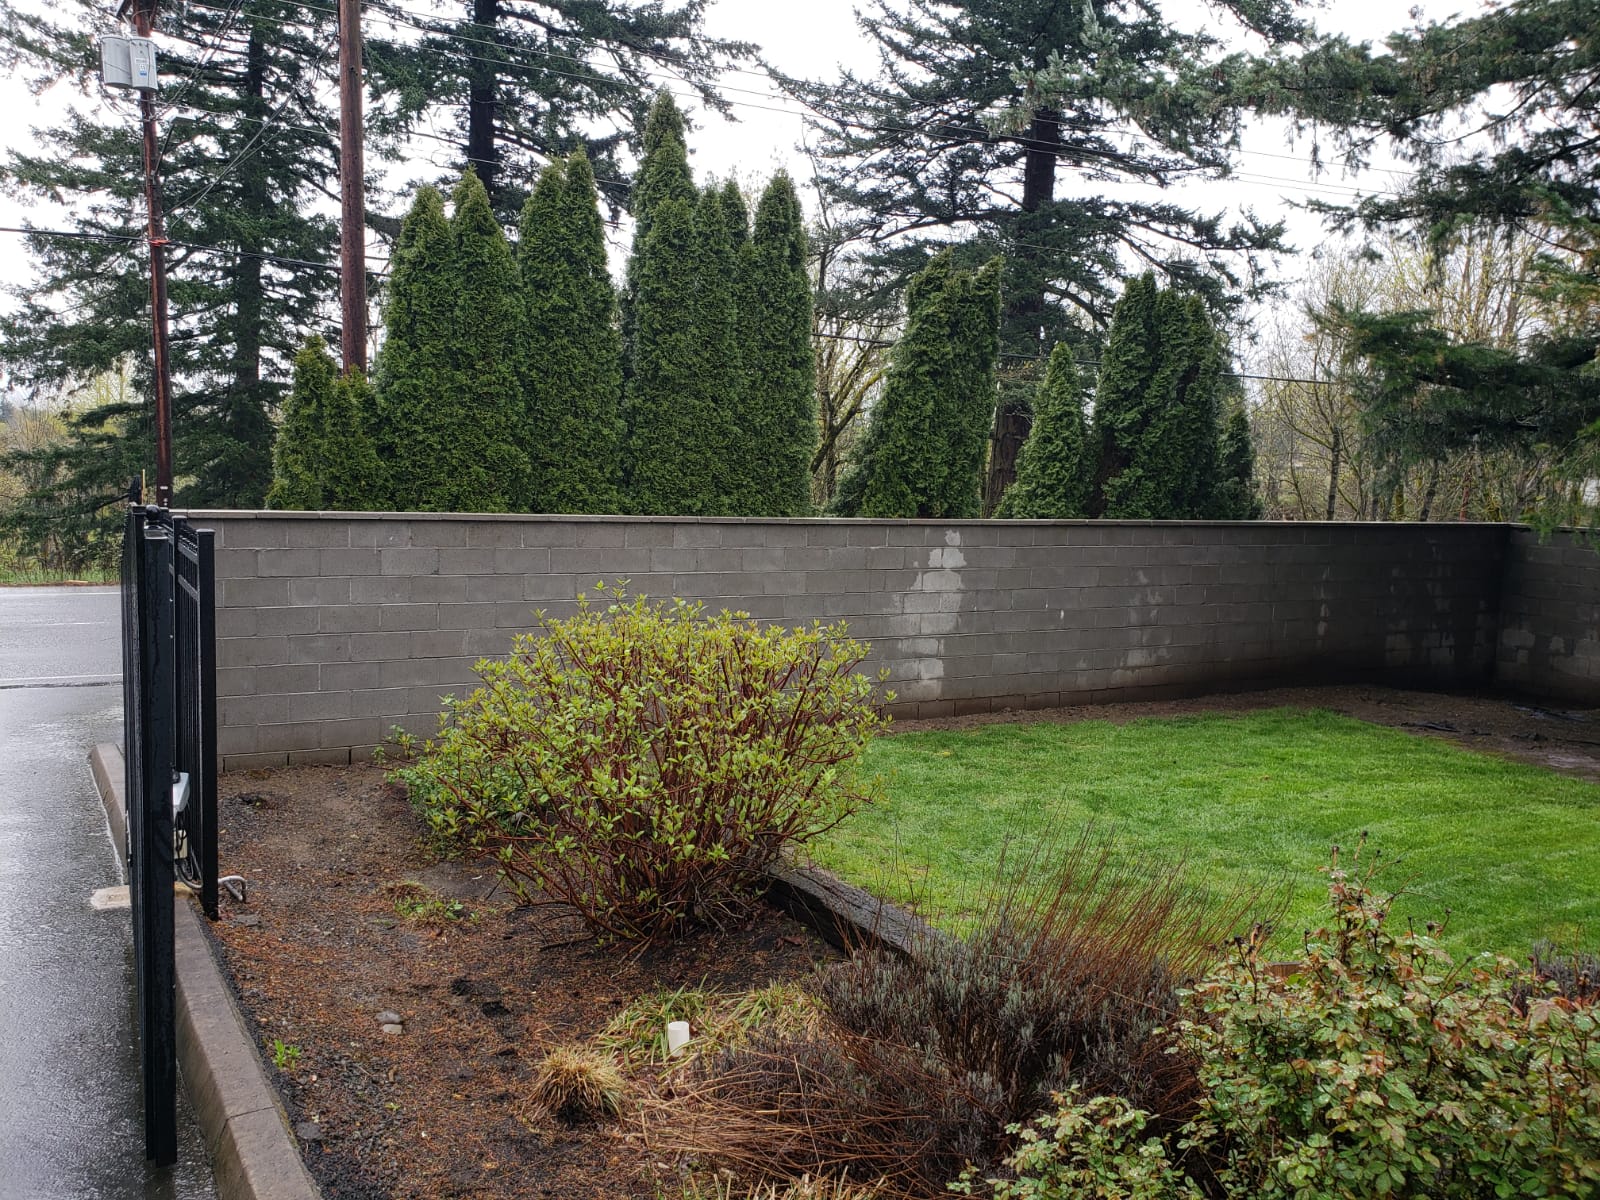 How to build a Concrete Retaining Wall for your Portland Patio